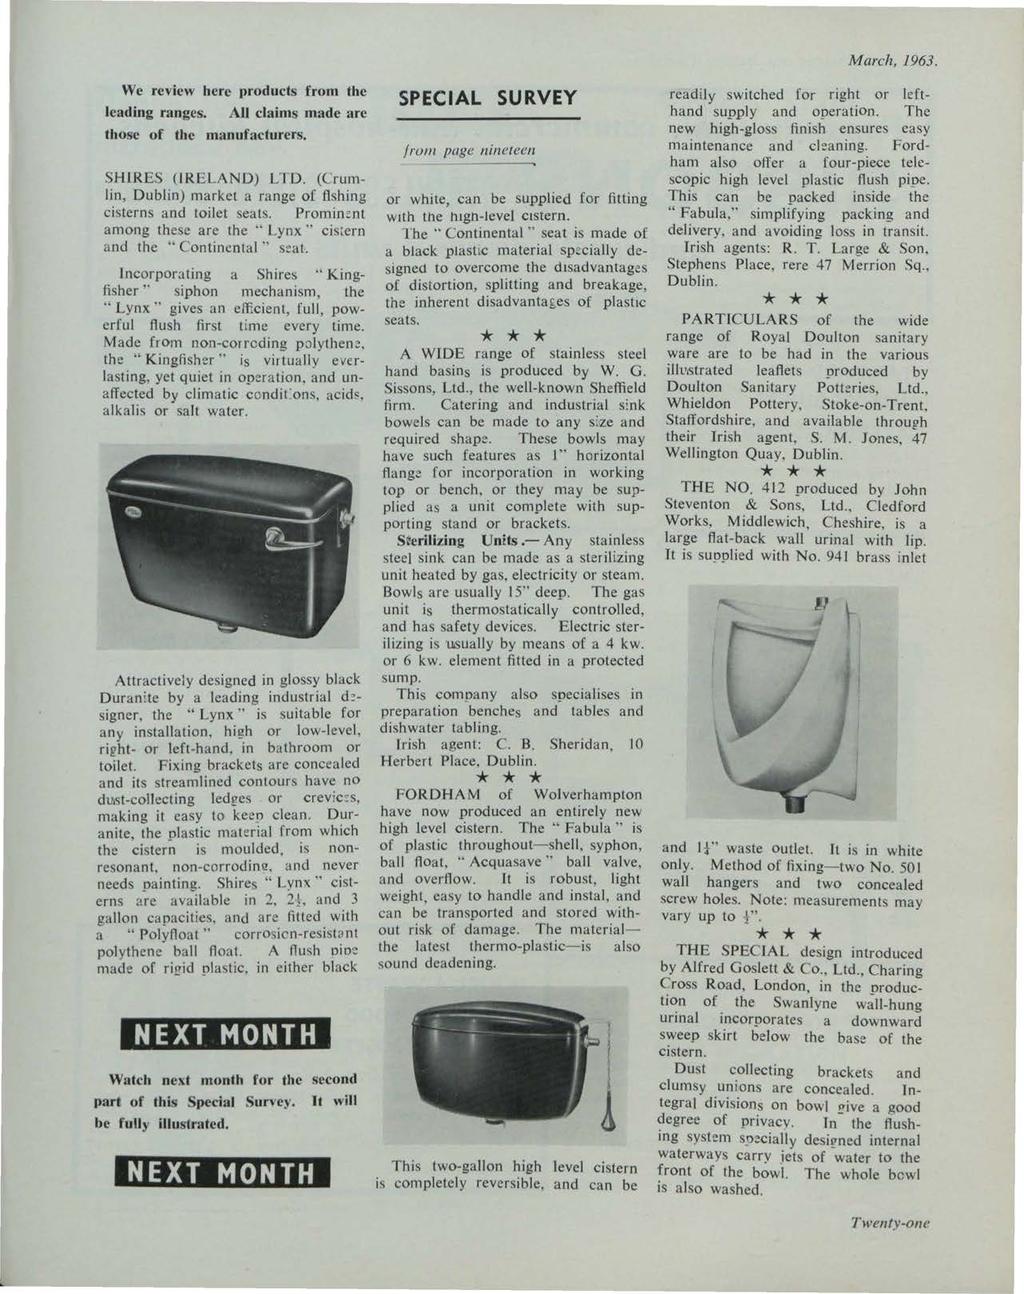 et al.: The Irish Plumber and Heating Contractor, March 1963 (complete is March, 1963. We review here products from the leading ranges. AU claims made arc those of the manufacturers.